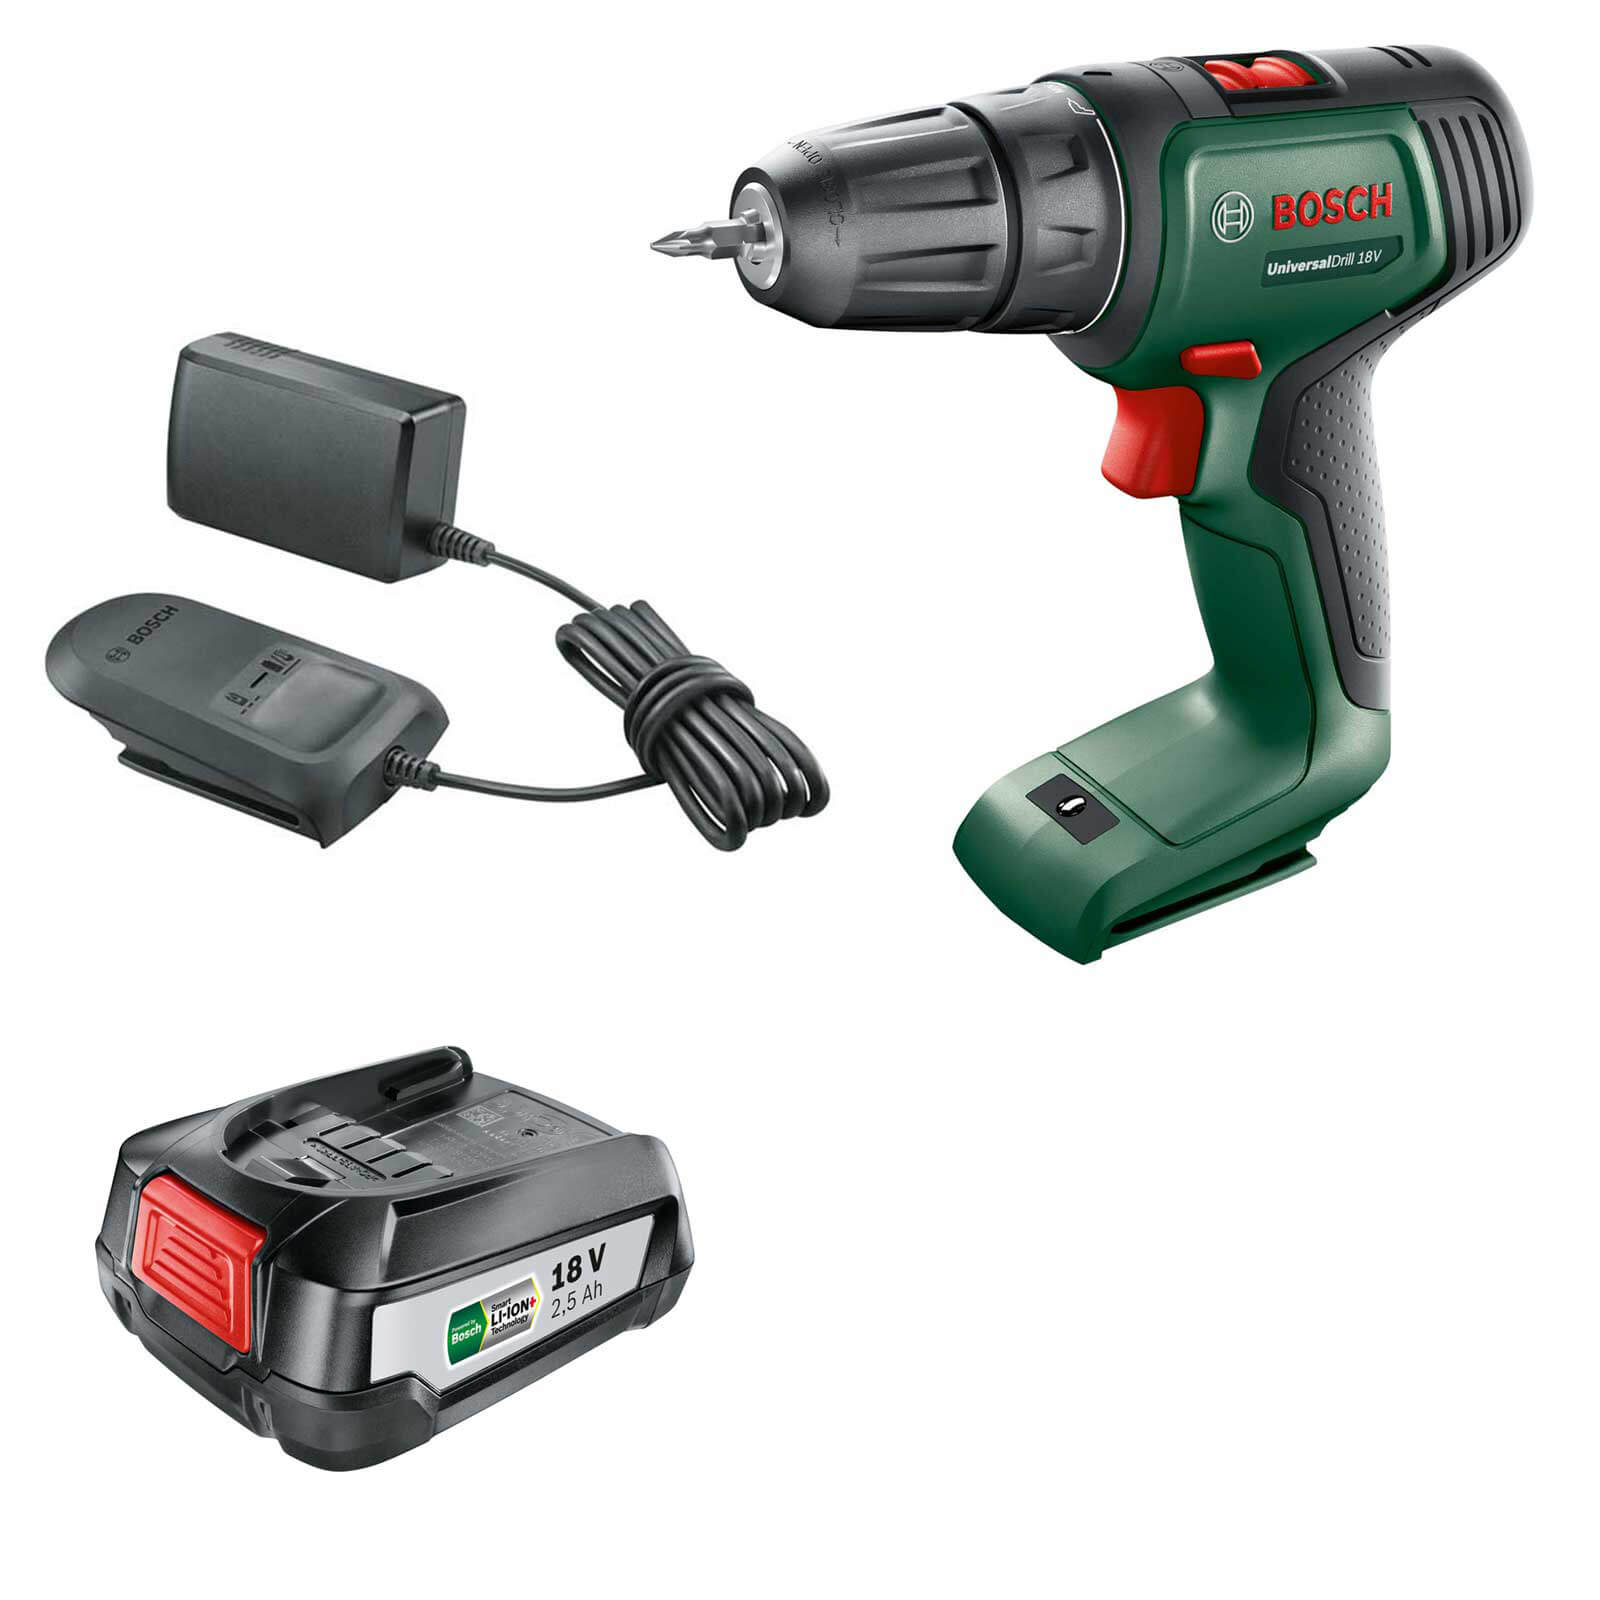 Image of Bosch UNIVERSALDRILL 18v Cordless Drill Driver 1 x 2.5ah Li-ion Charger No Case